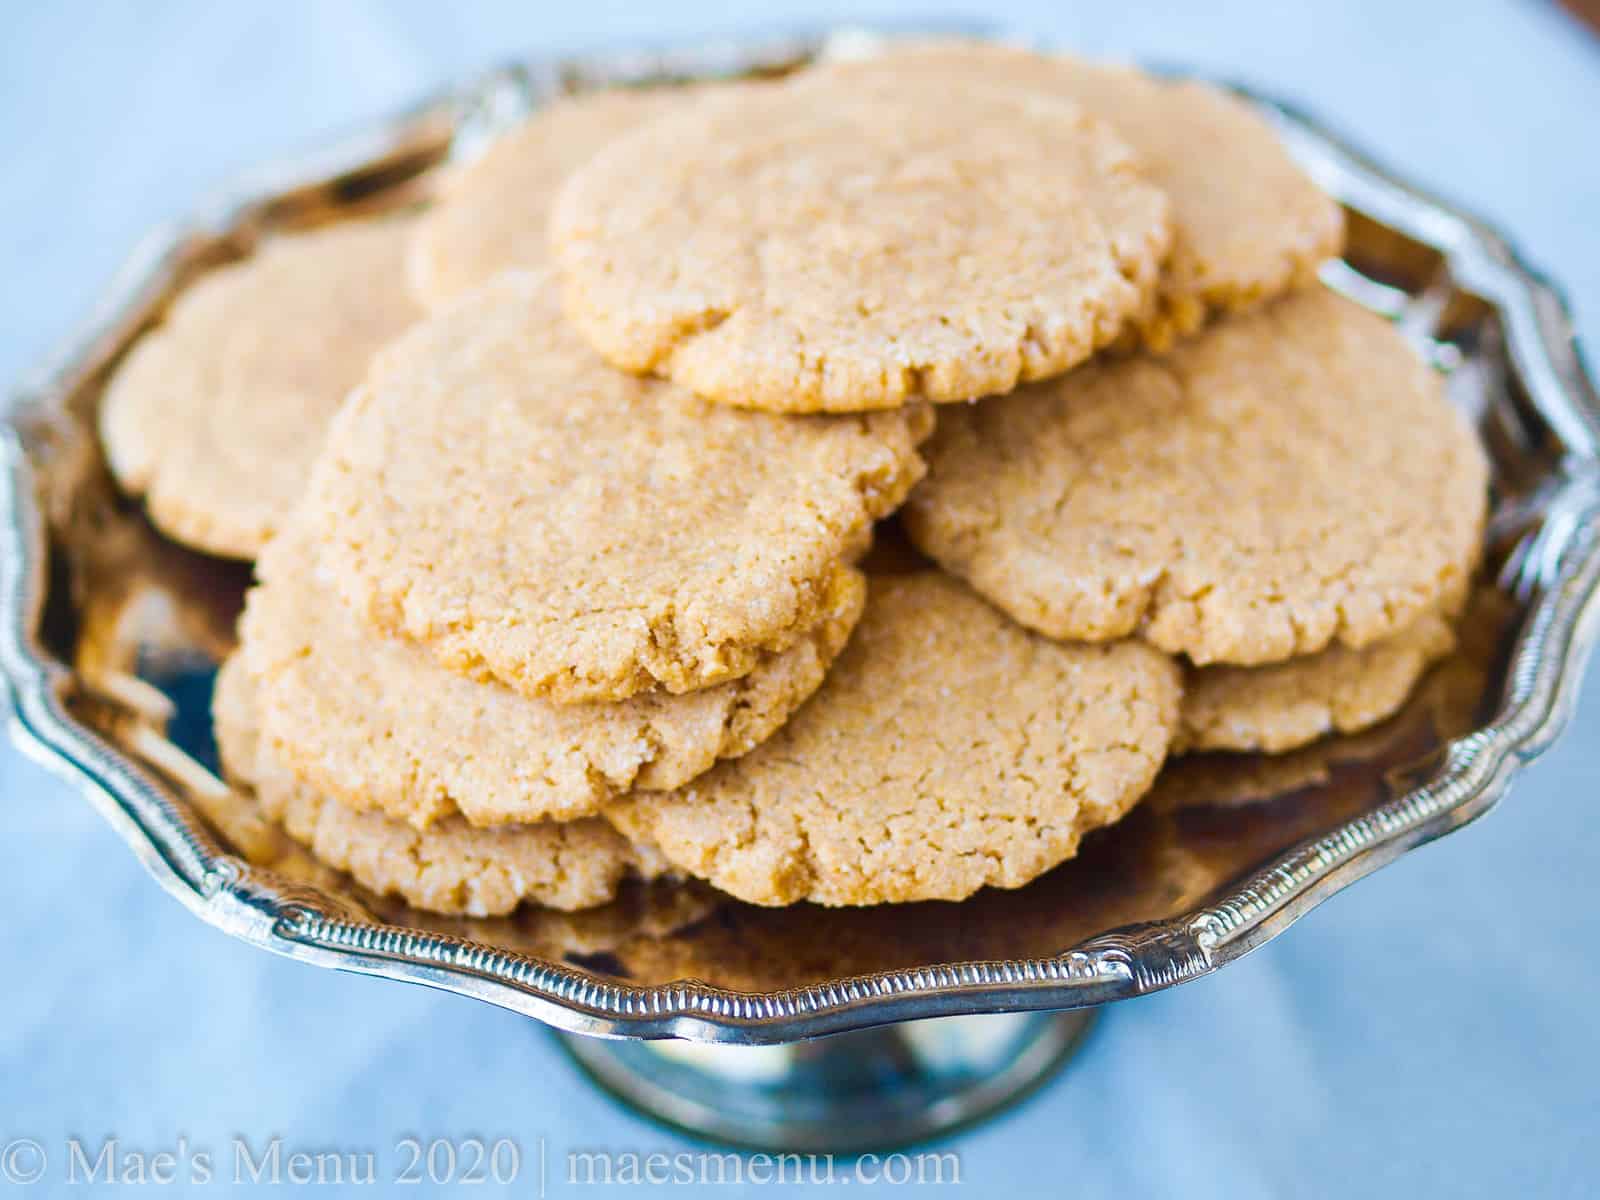 A plate of whole wheat peanut butter cookies